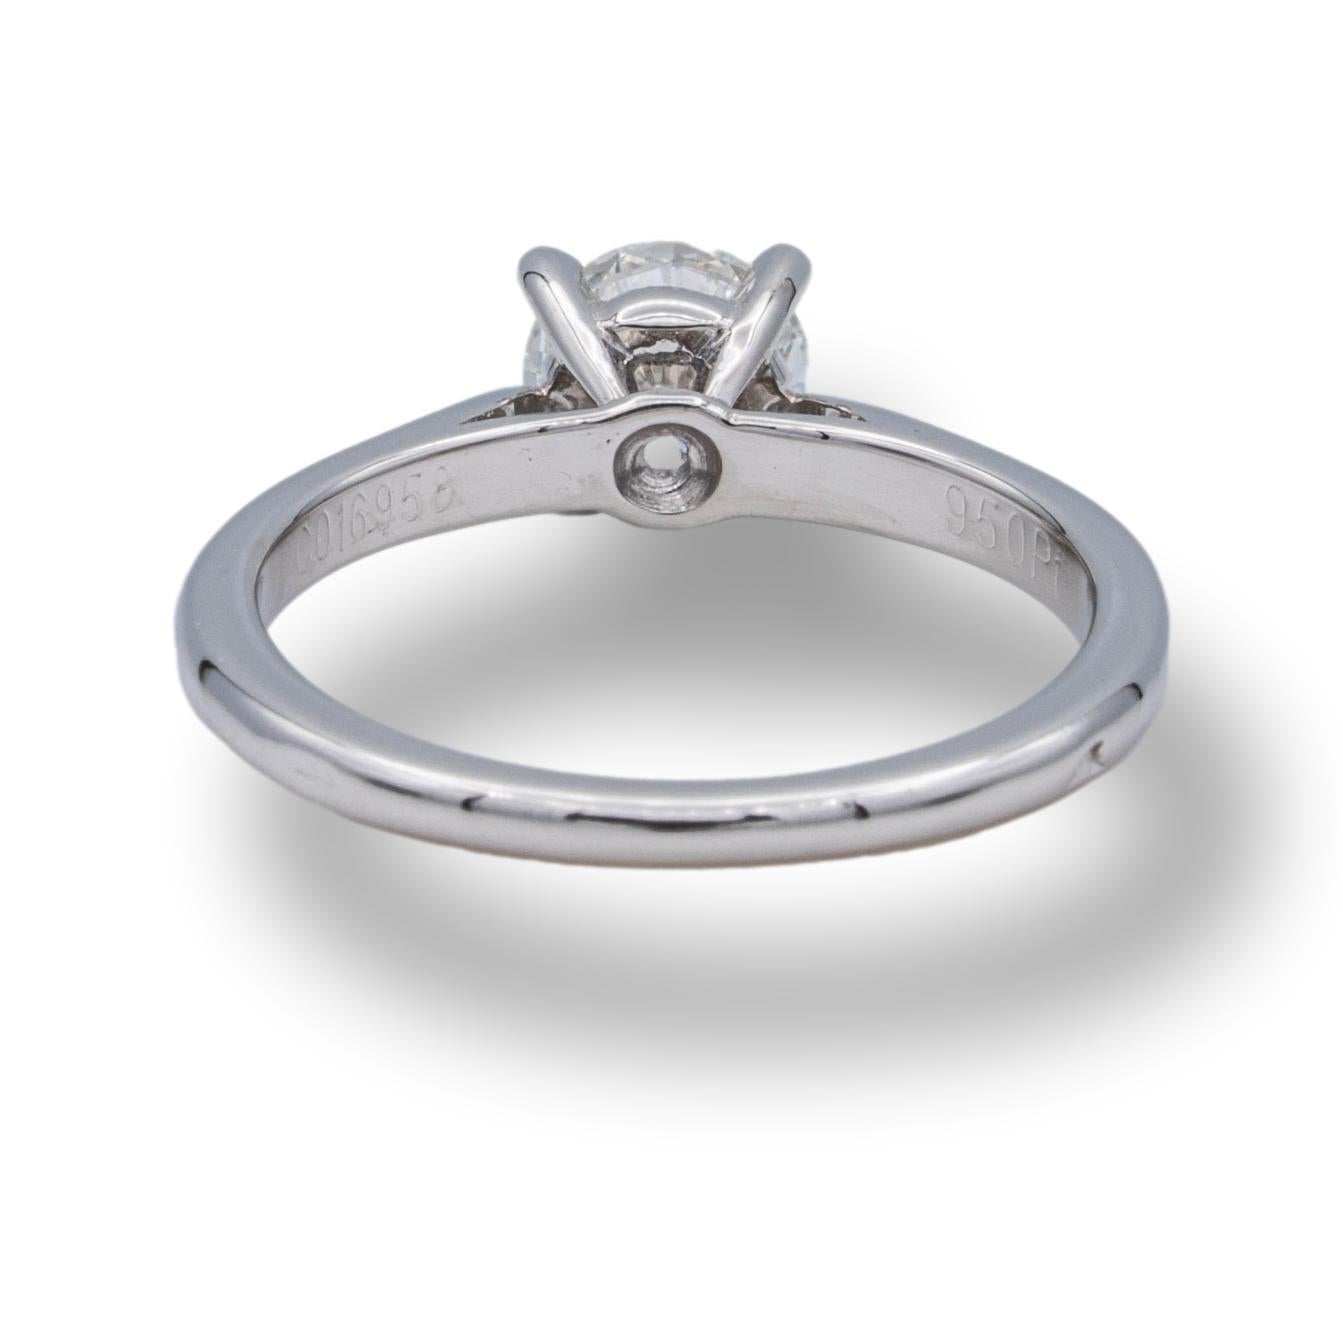 Cartier engagement ring from the 1895 collection finely crafted in platinum with a round brilliant cut diamond center weighing 0.55 cts. G color VVS2 clarity graded by the GIA ( Gemological Institute of America). The GIA report confirms both the